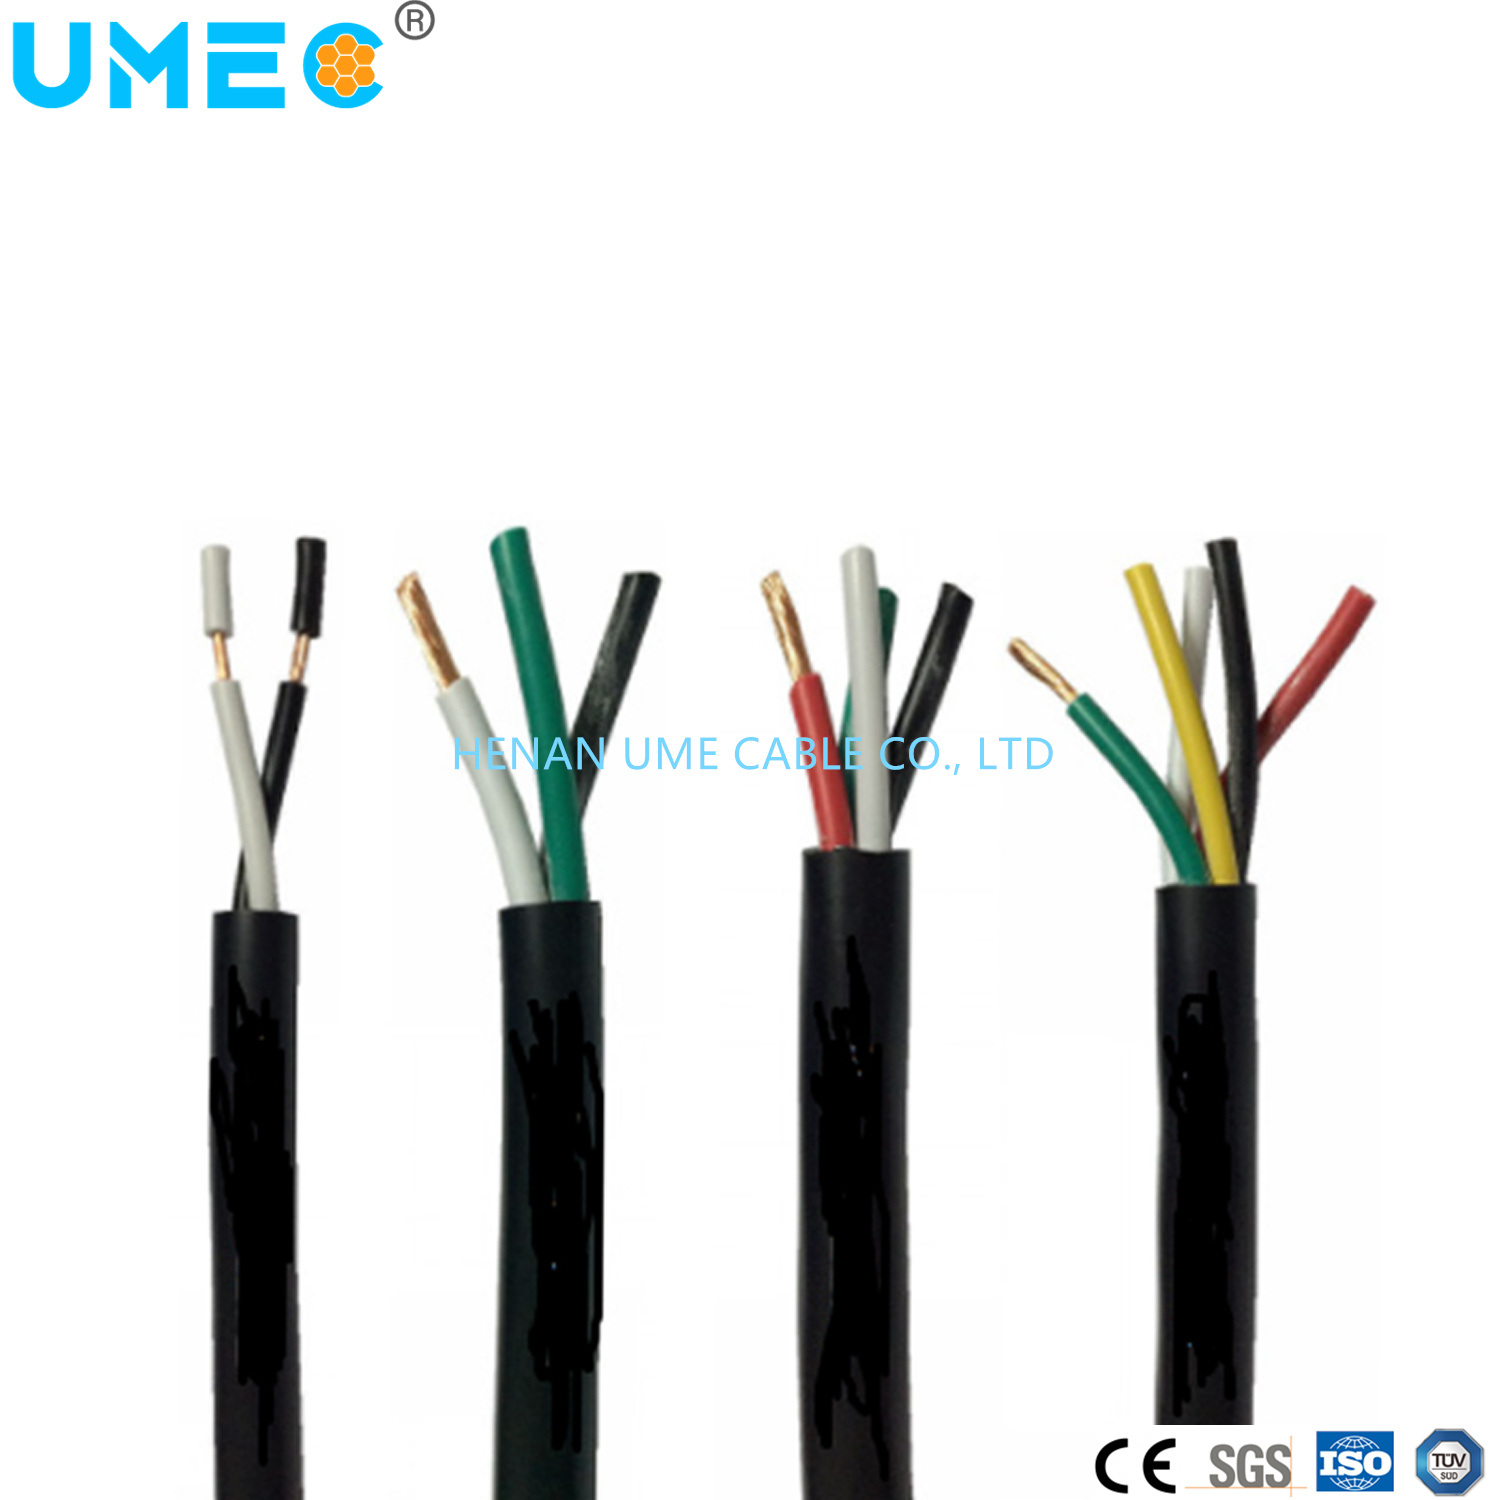 12/14 AWG Low Voltage Rubber Sheath Flexible Soow Cable